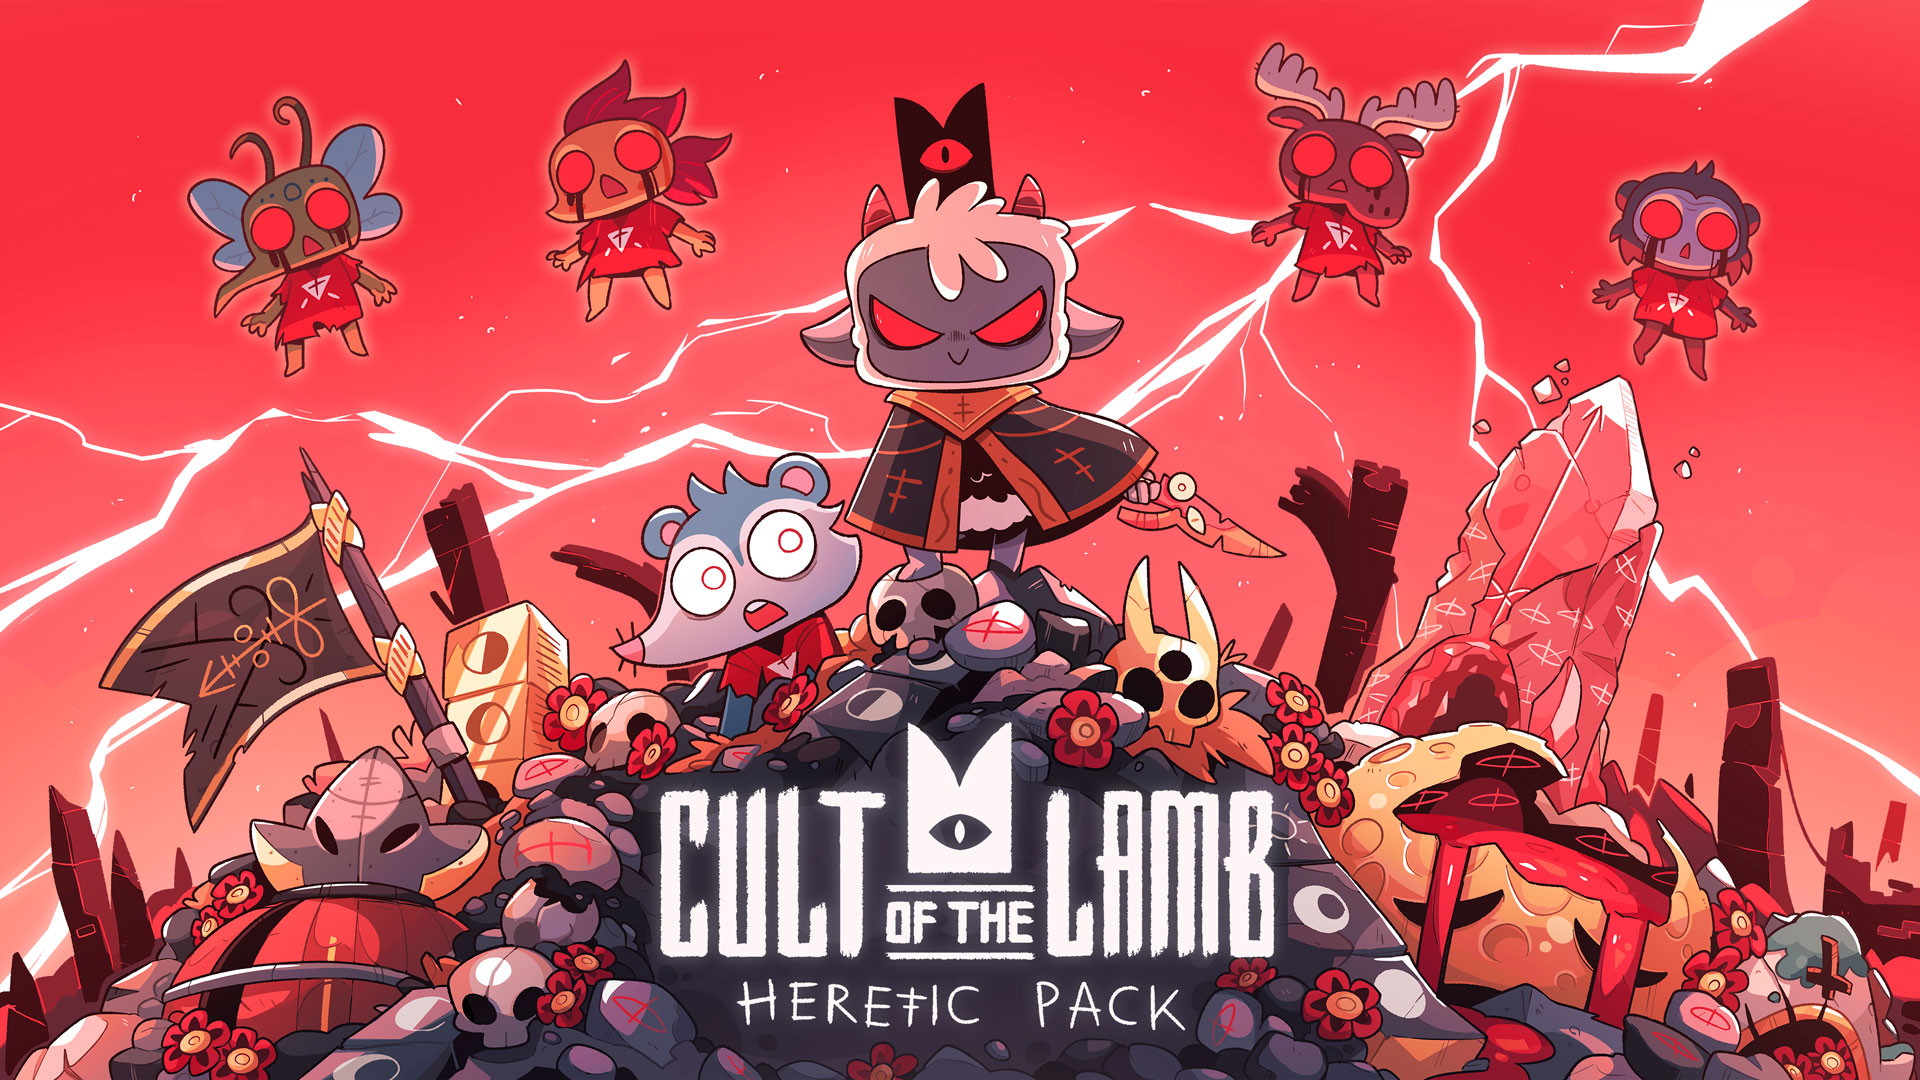 0 Cheats for Cult of the Lamb - Heretic Pack